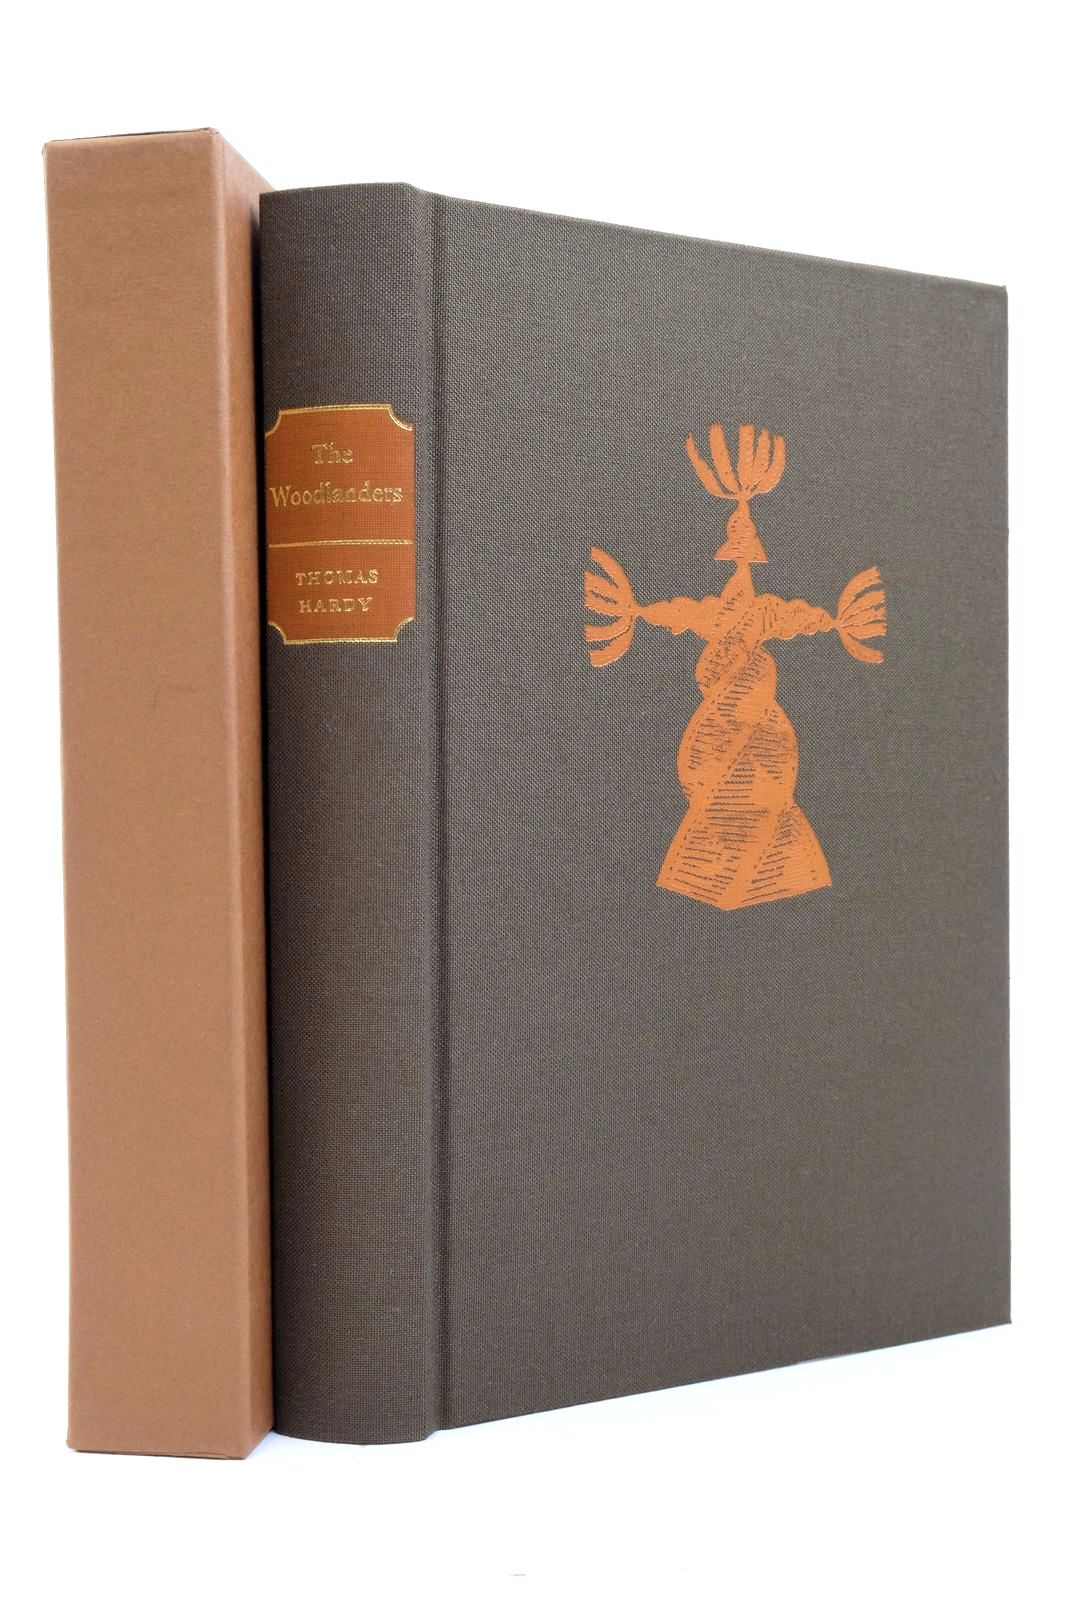 Photo of THE WOODLANDERS written by Hardy, Thomas illustrated by Reddick, Peter published by Folio Society (STOCK CODE: 2138221)  for sale by Stella & Rose's Books